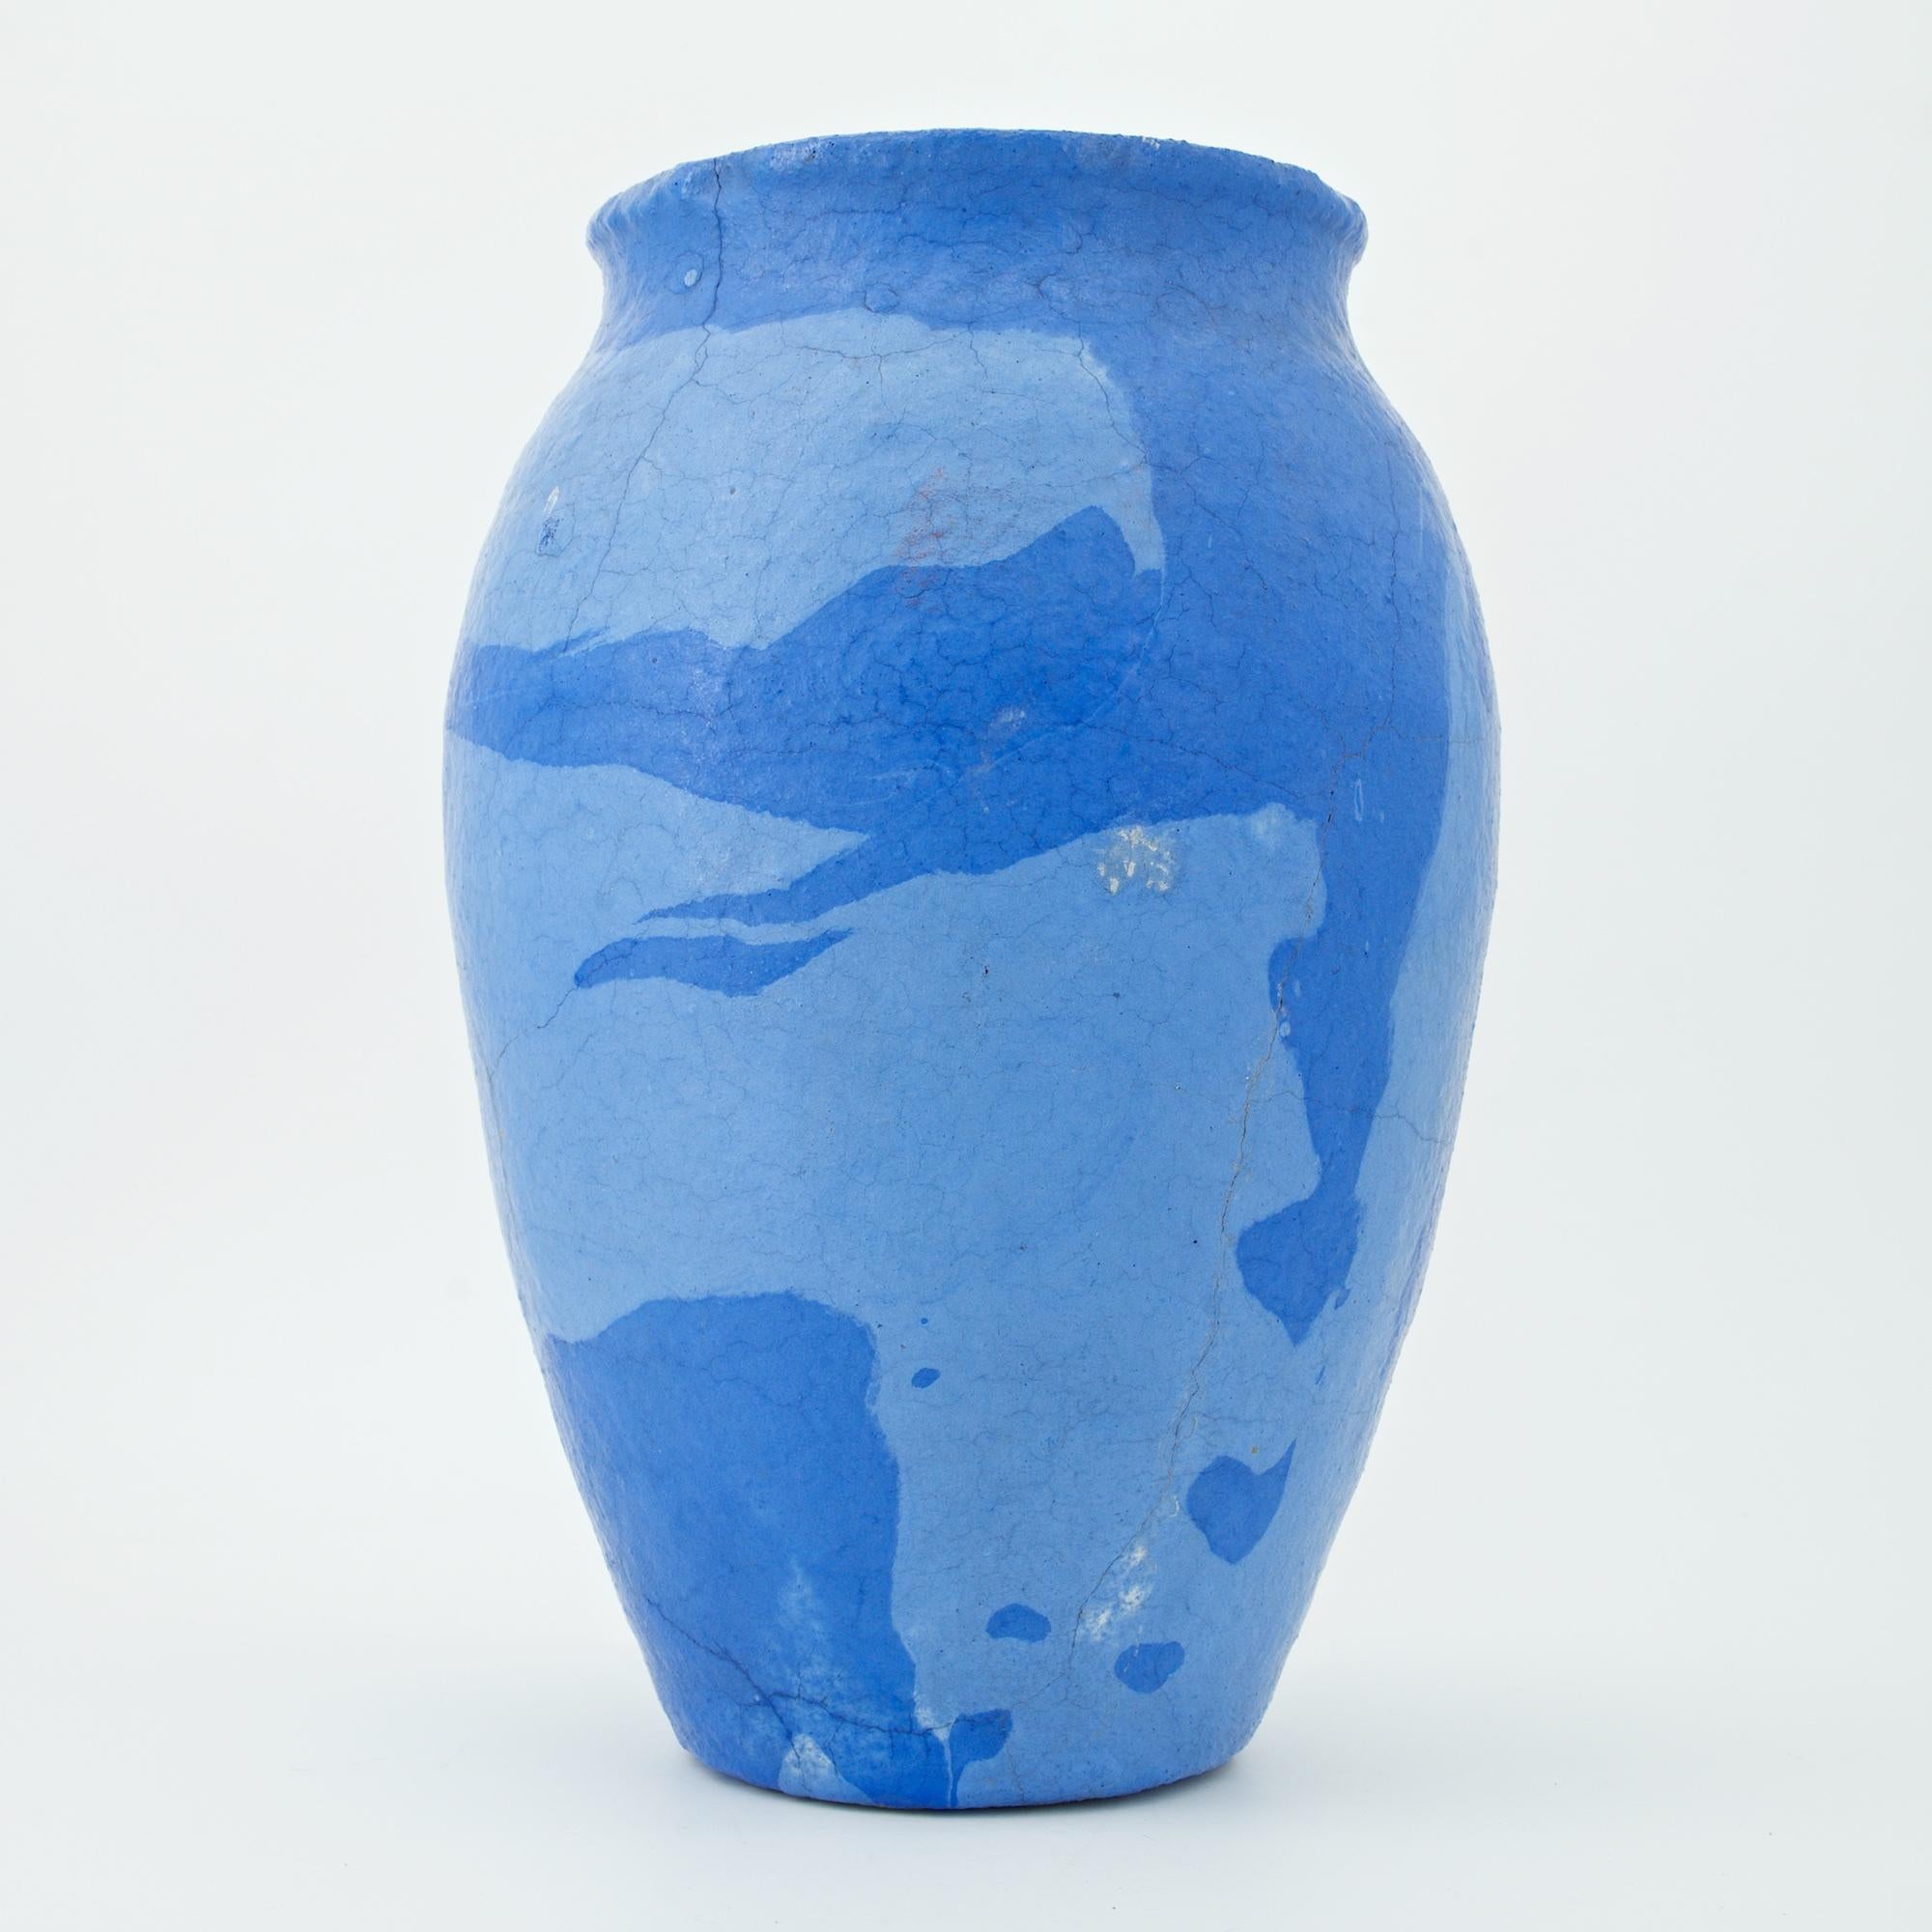 Ozark Pottery Company vase in blue and light blue swirled glaze. When demand for utilitarian ware waned, many potteries introduced their art line. Artificially coloring the clay and turning it on the potter's wheel made pieces with a marbleized or